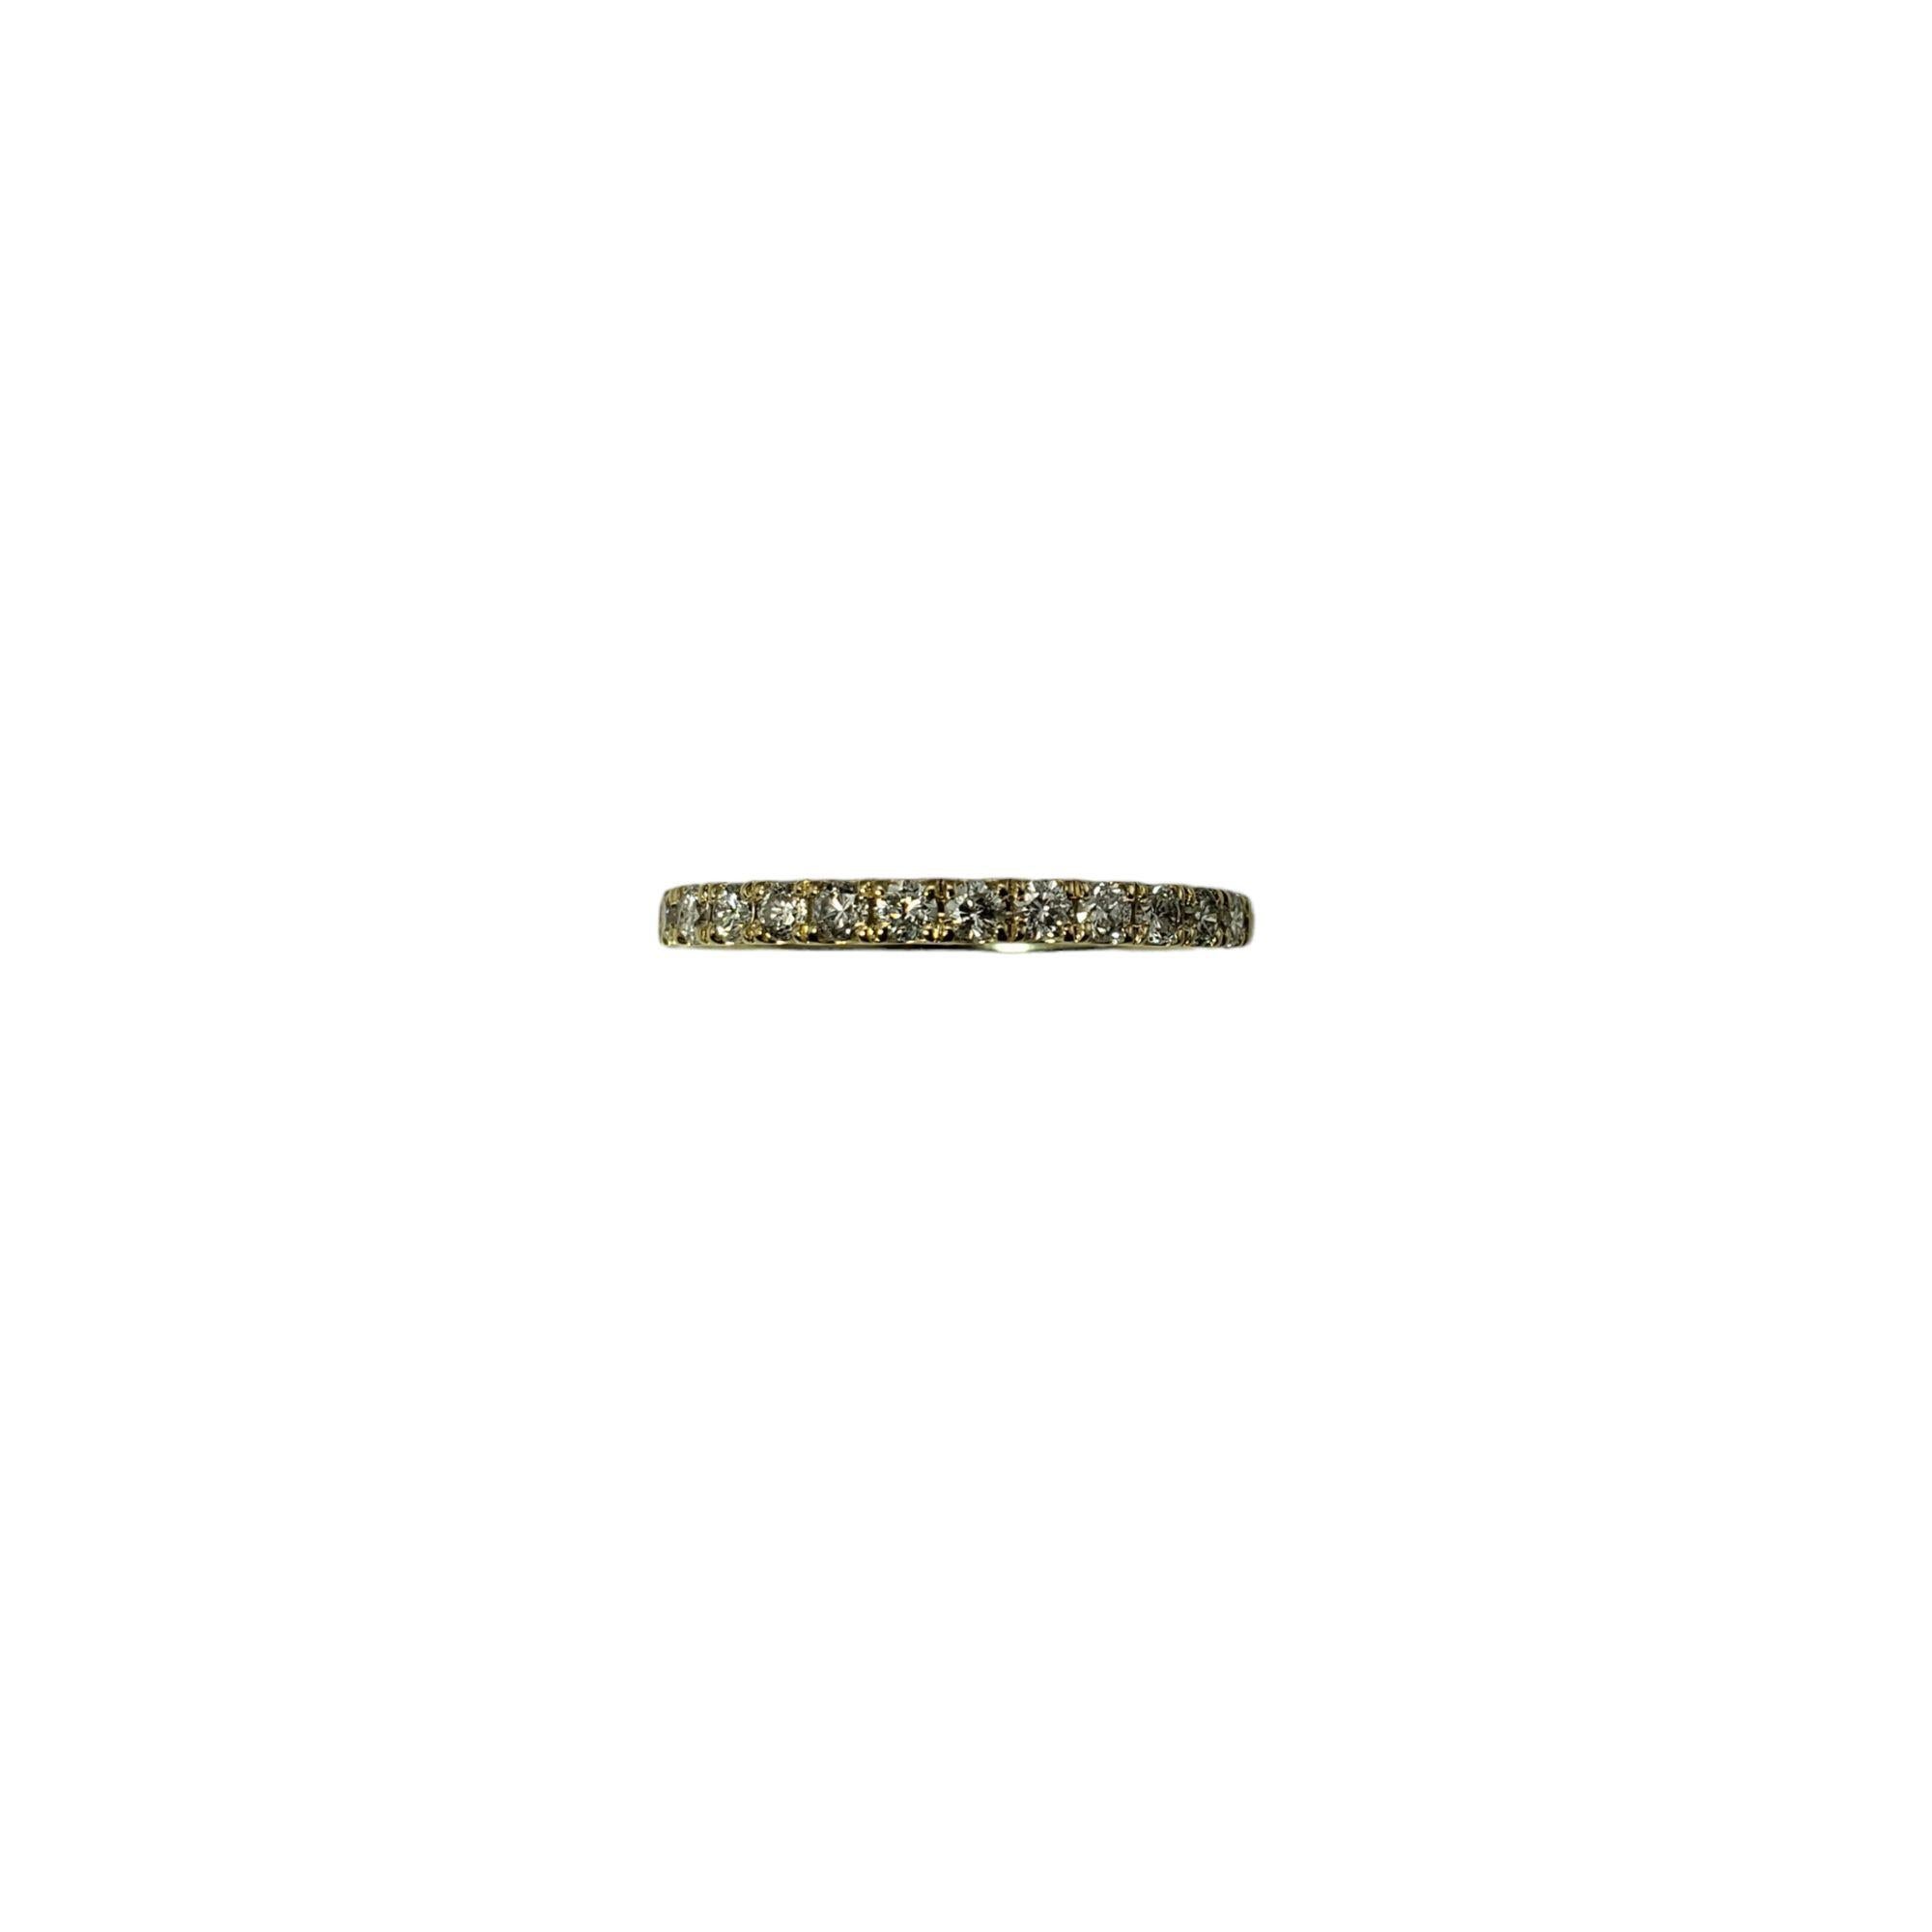 Vintage 14 Karat Yellow Gold Diamond Band Ring Size 6.75-

This sparkling band features 13 round brilliant cut diamonds set in classic 14K yellow gold. Width: 2 mm.

Approximate total diamond weight: .39 ct.

Diamond clarity: I1-I2

Diamond color: